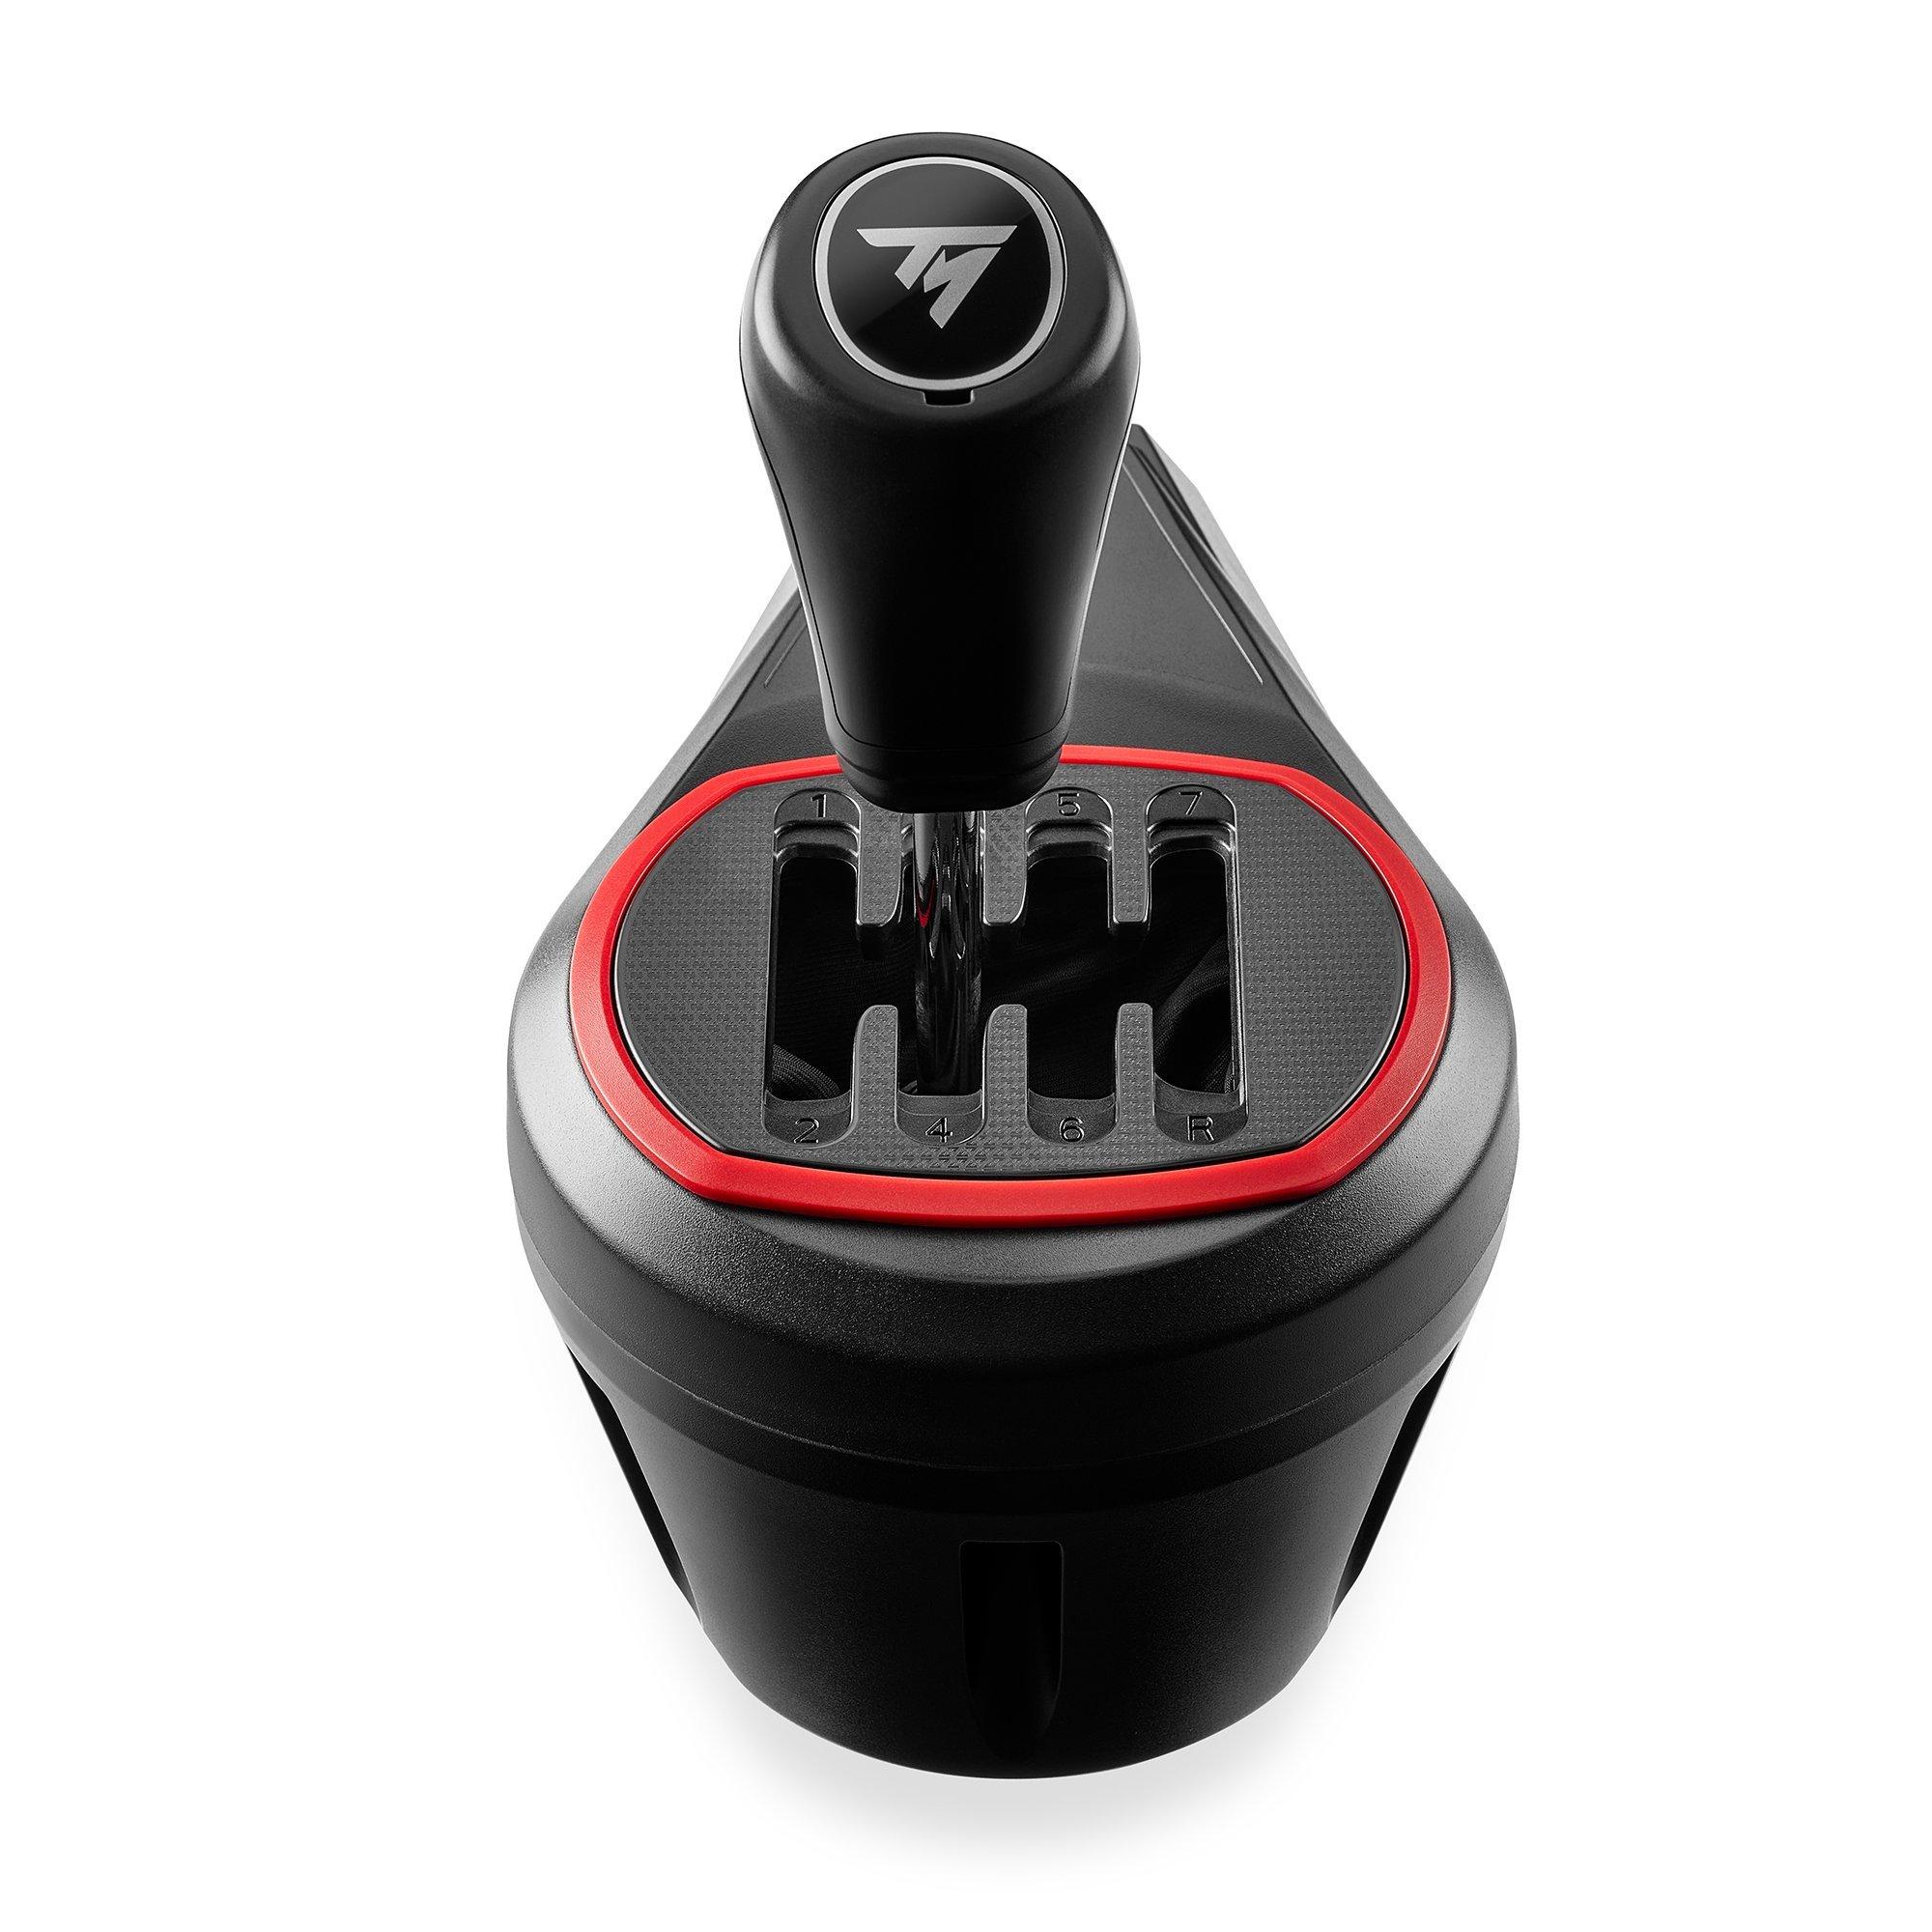 https://media.gamestop.com/i/gamestop/20007143/Thrustmaster-TH8S-Shifter-Add-On-8-Gear-Shifter-for-Racing-Wheel-for-PlayStation-Xbox-and-PC